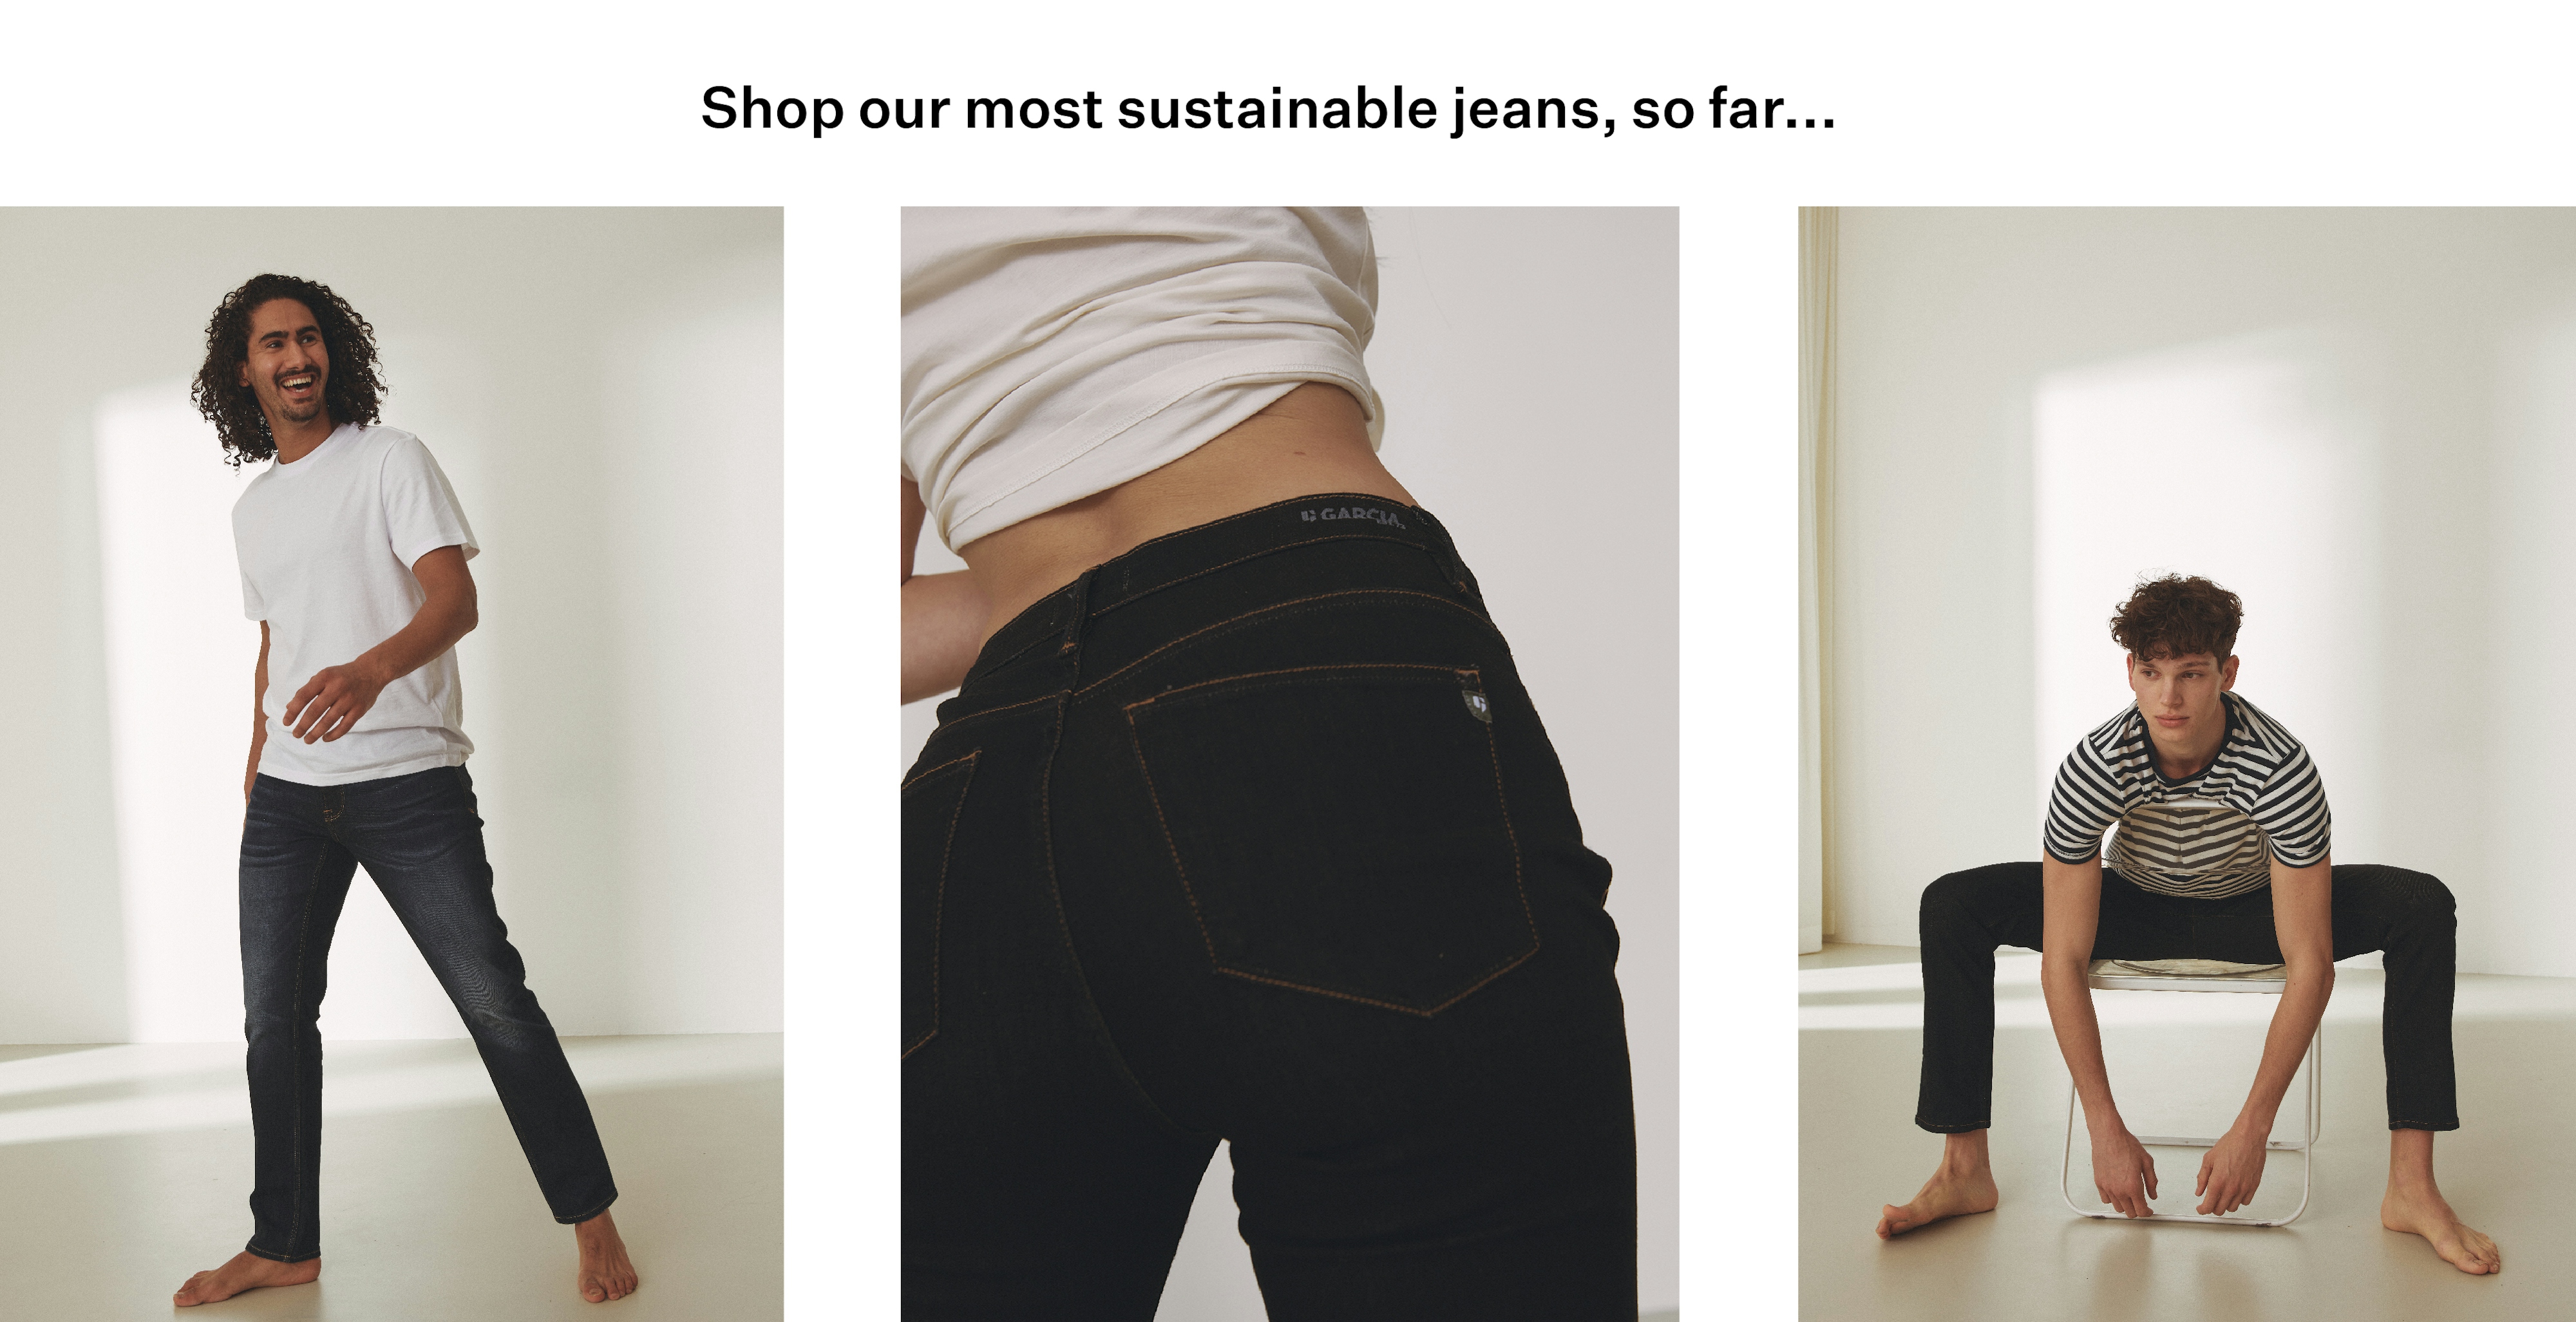 Garcia | Our STORIES | Sustainable Most Jeans